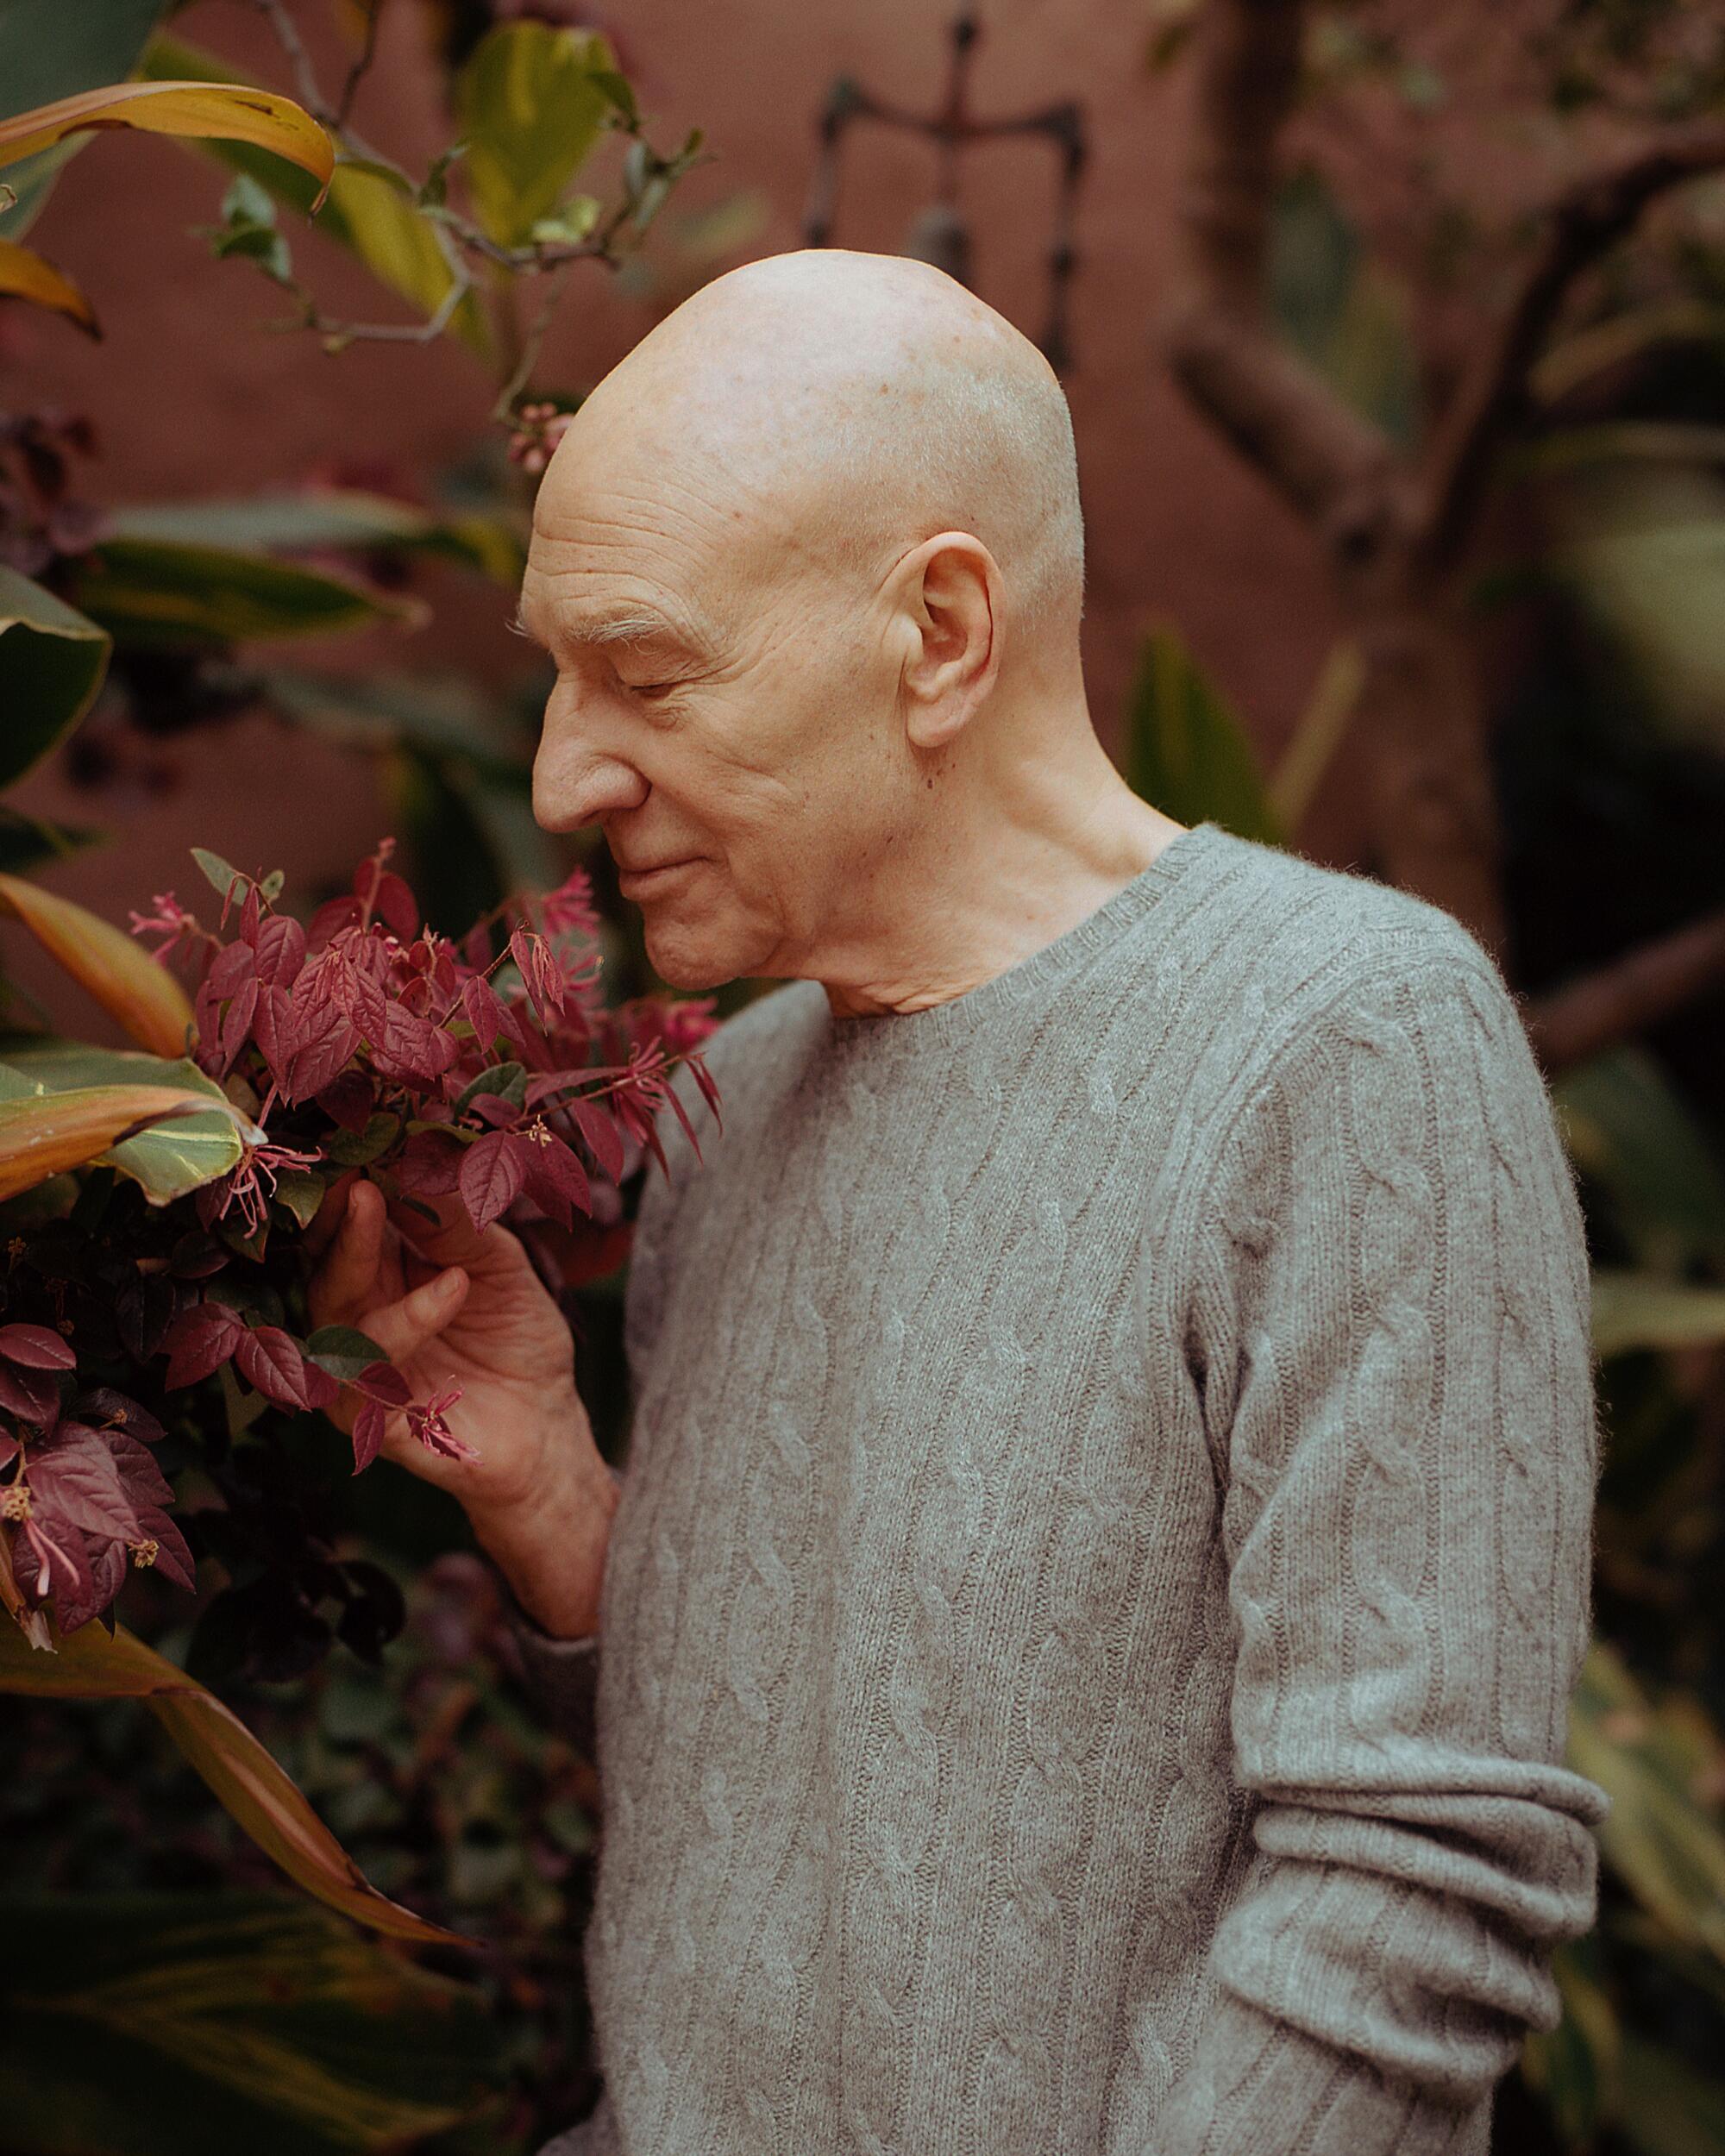 Actor Patrick Stewart closely examines a purple flower.